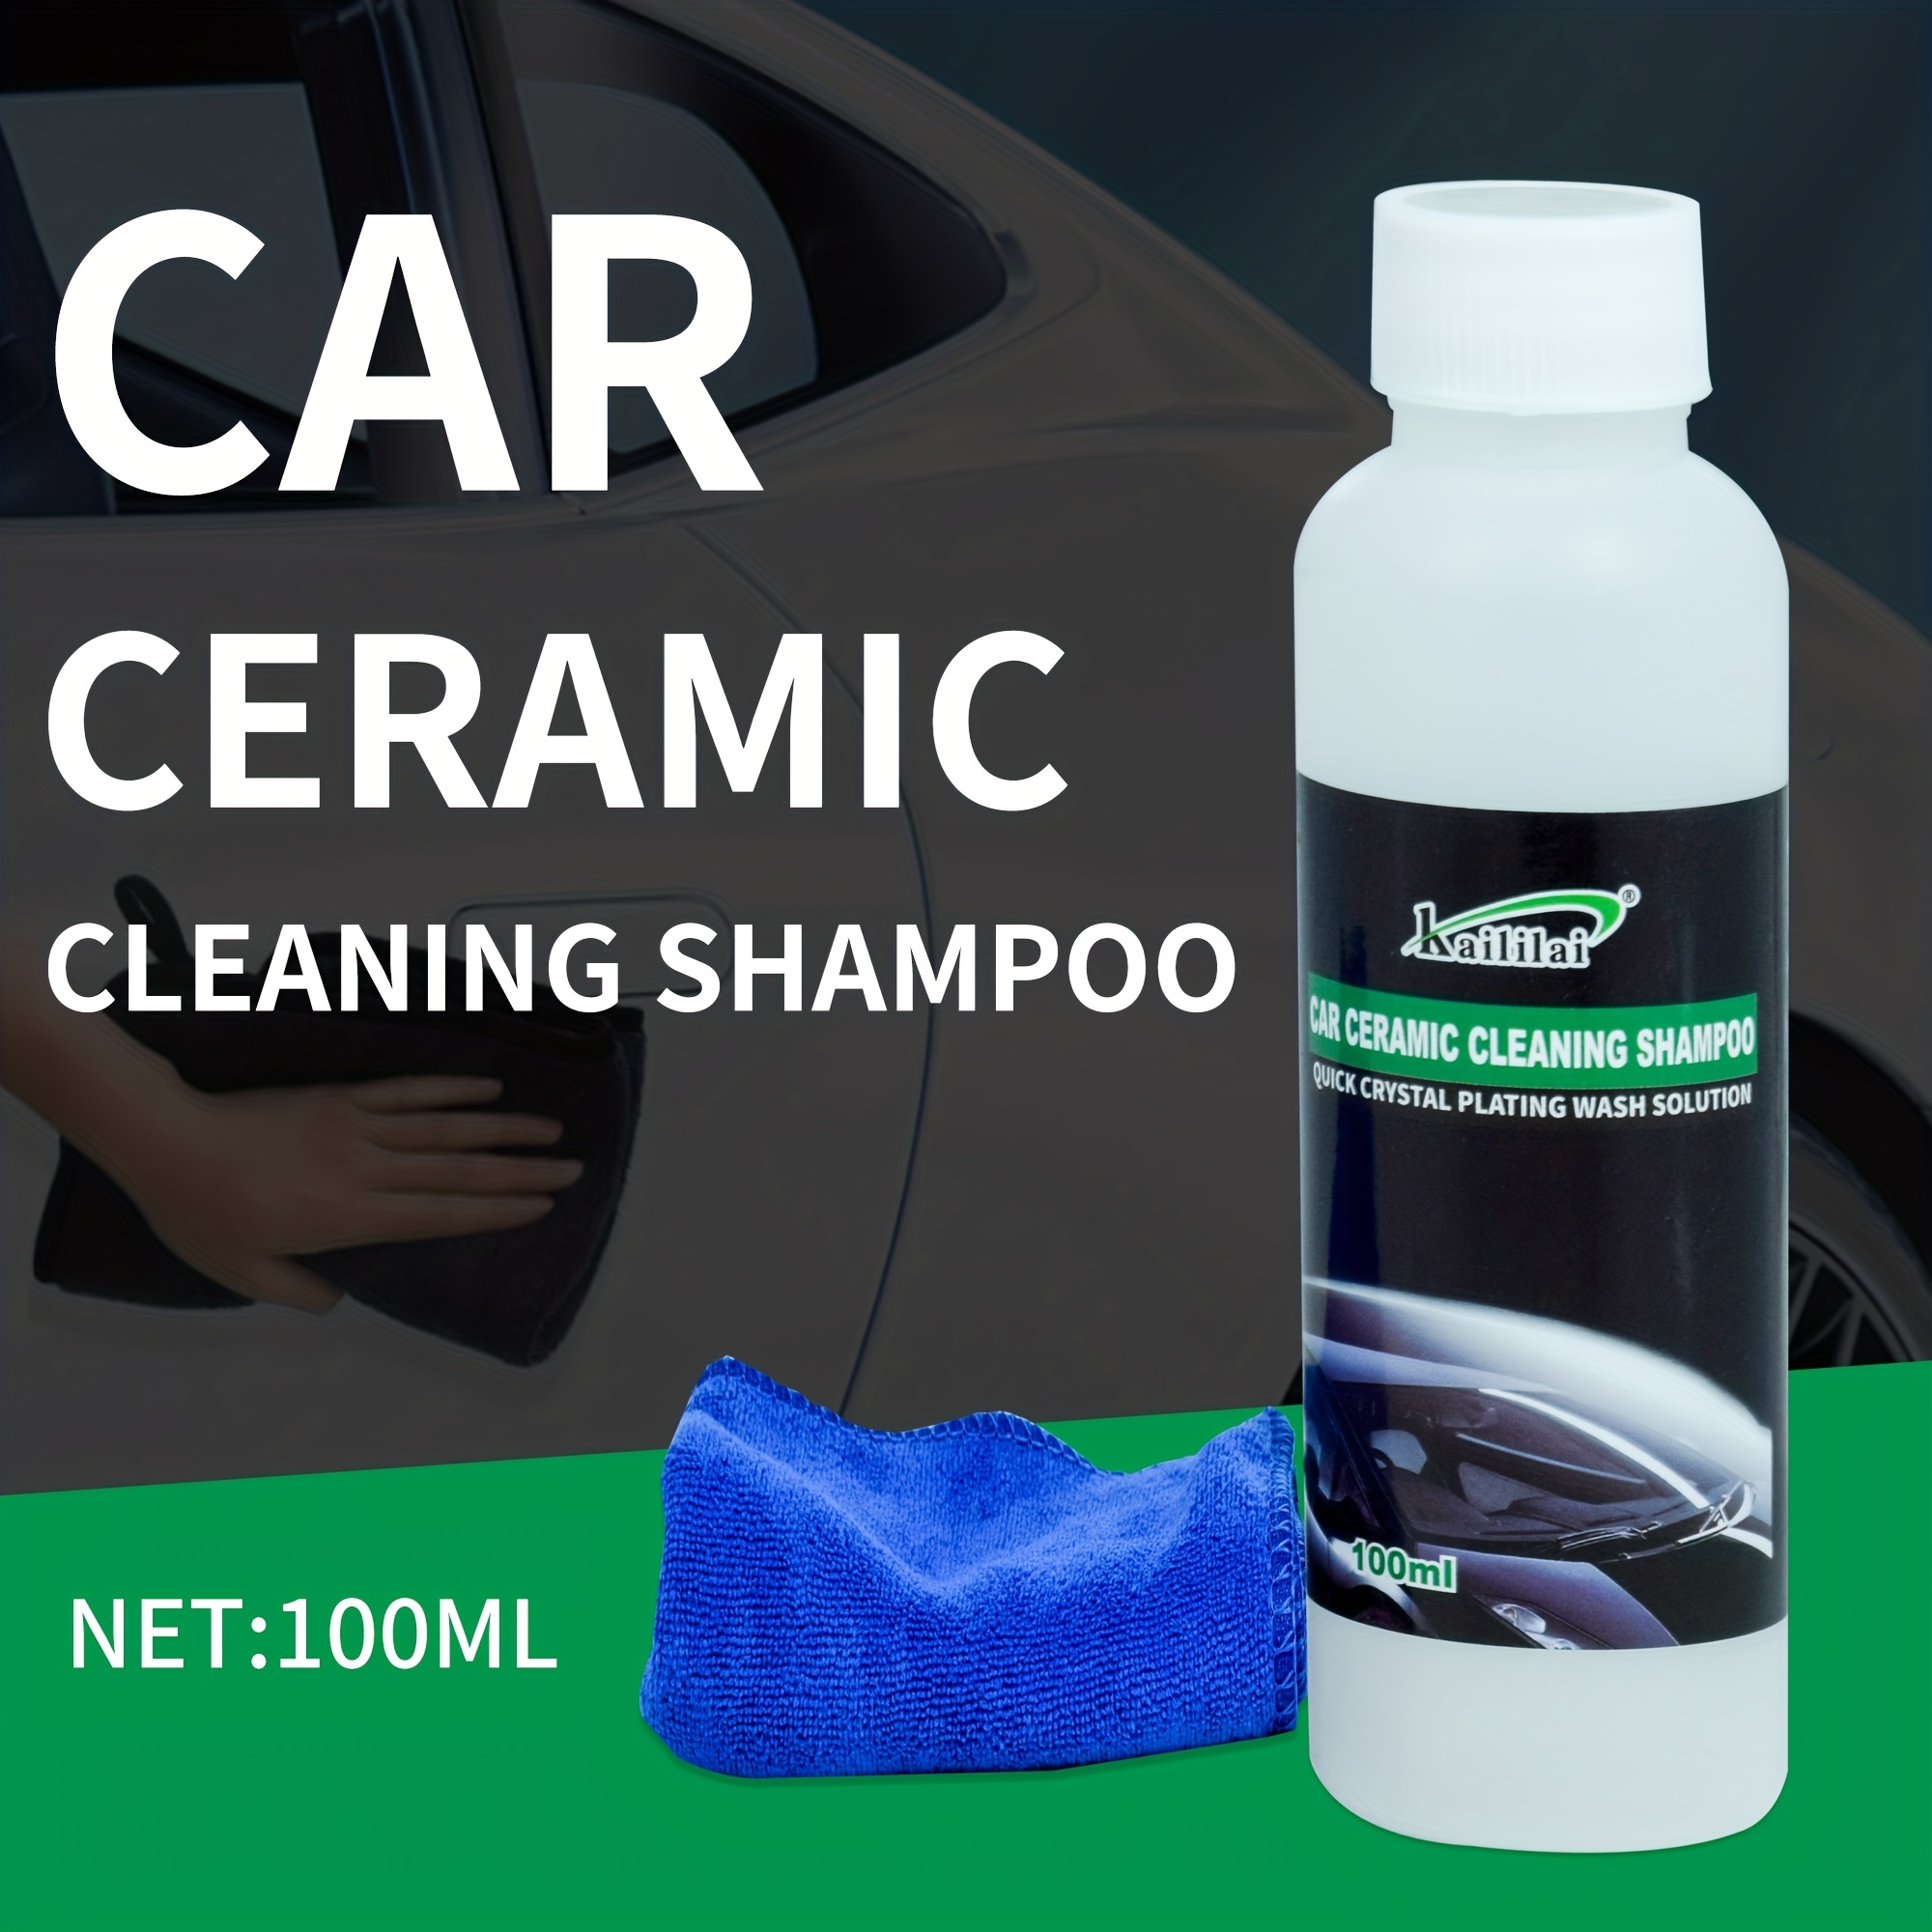 100ml Car Cleaning Spray Car Surface Decontamination Car Paint Cleaner With  Nozzle For Car Exterior Cleaning